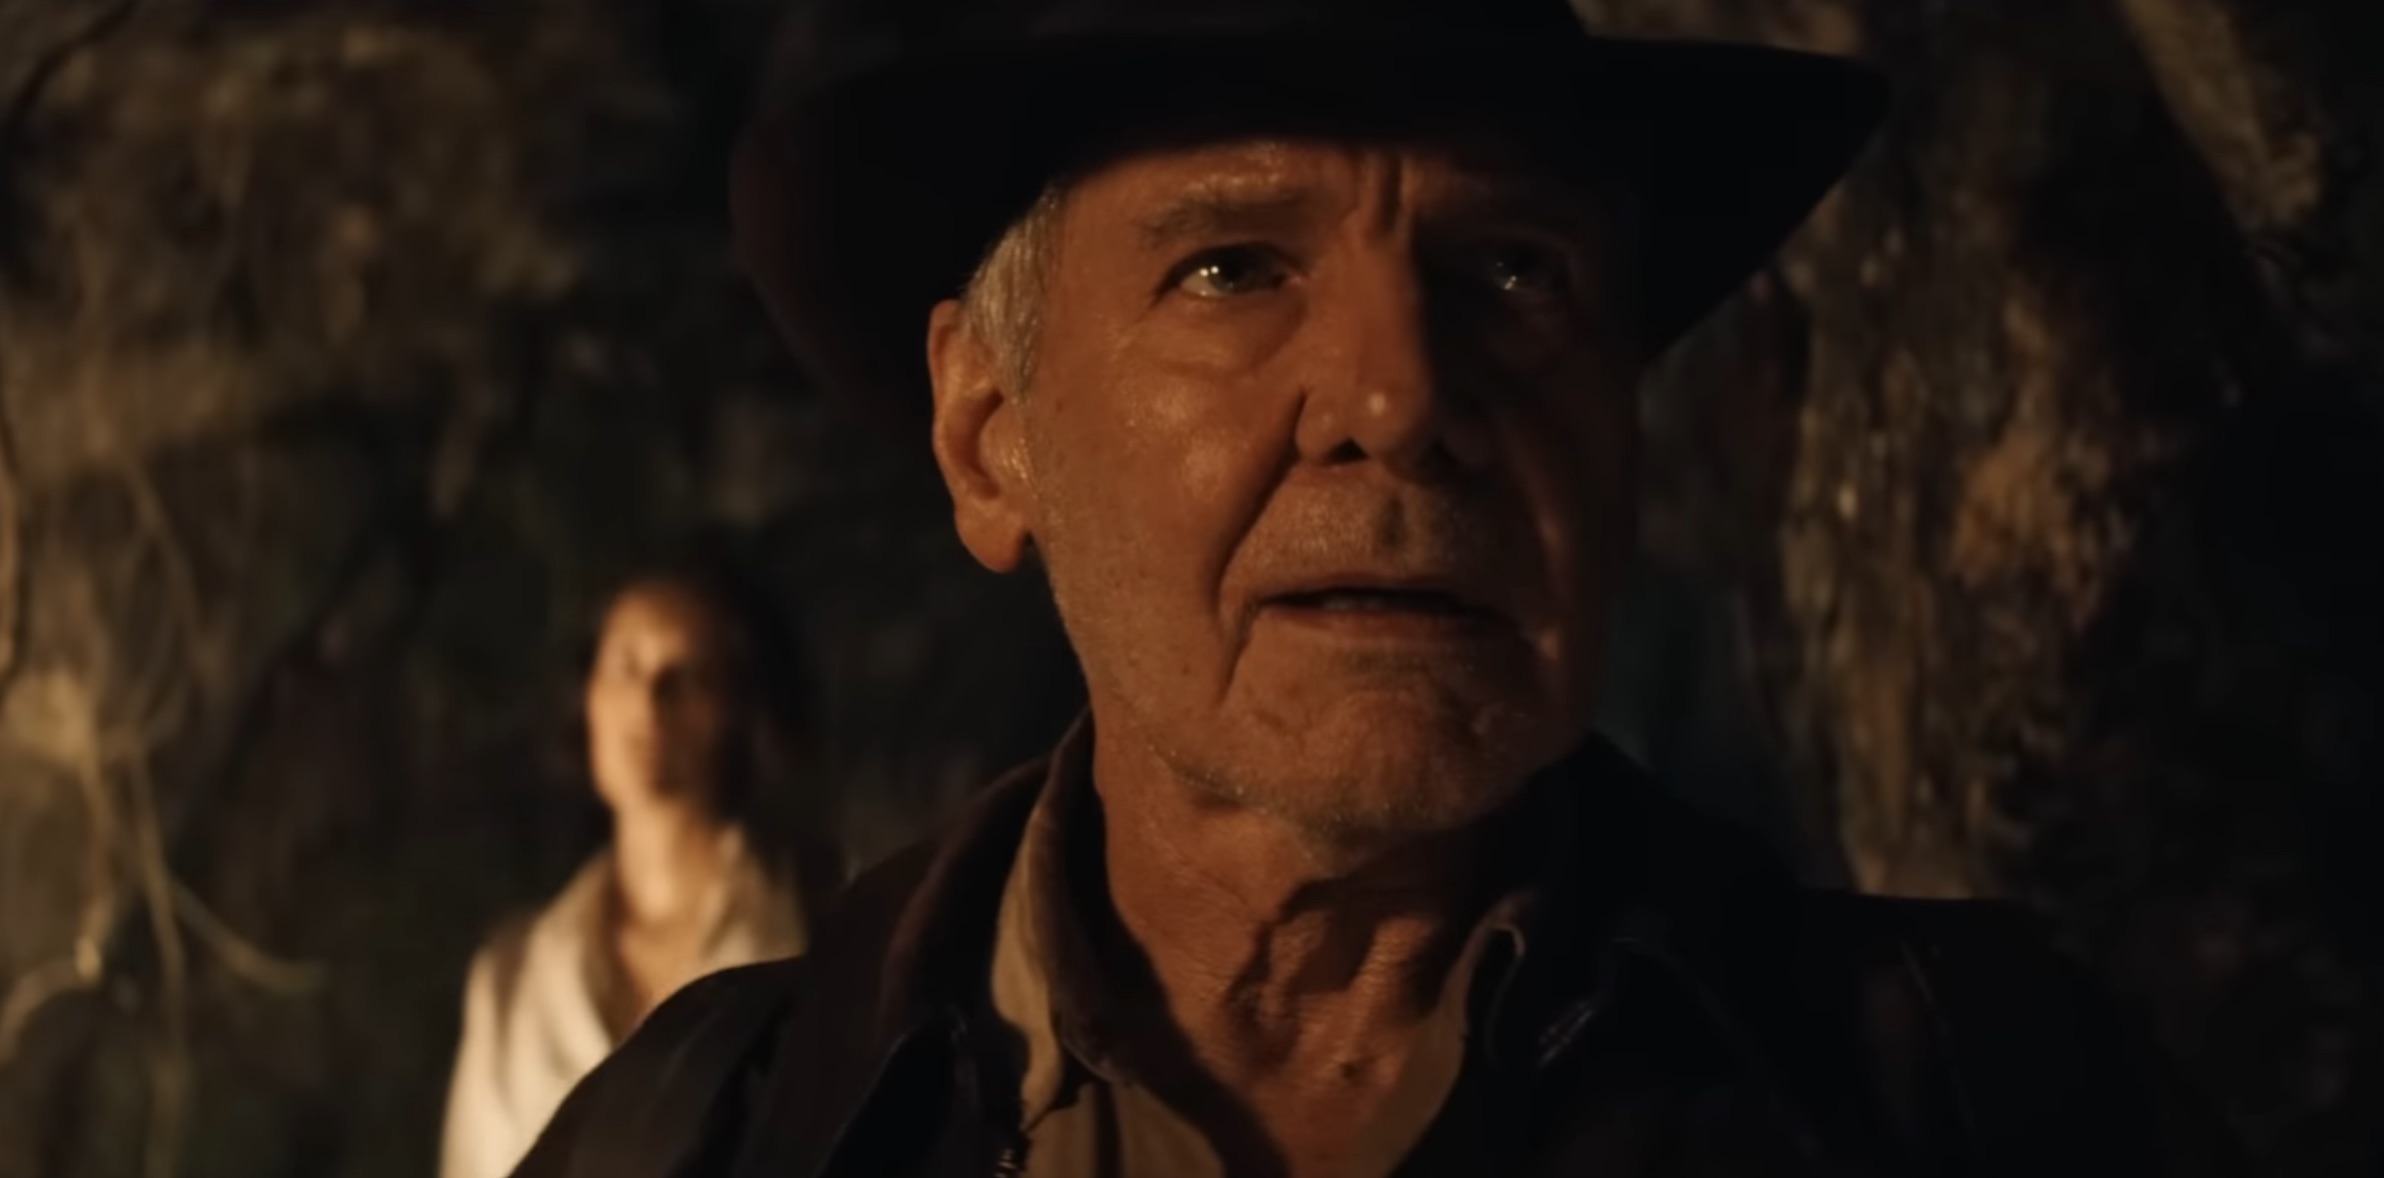 Harrison Ford fights back tears in emotional Indiana Jones interview